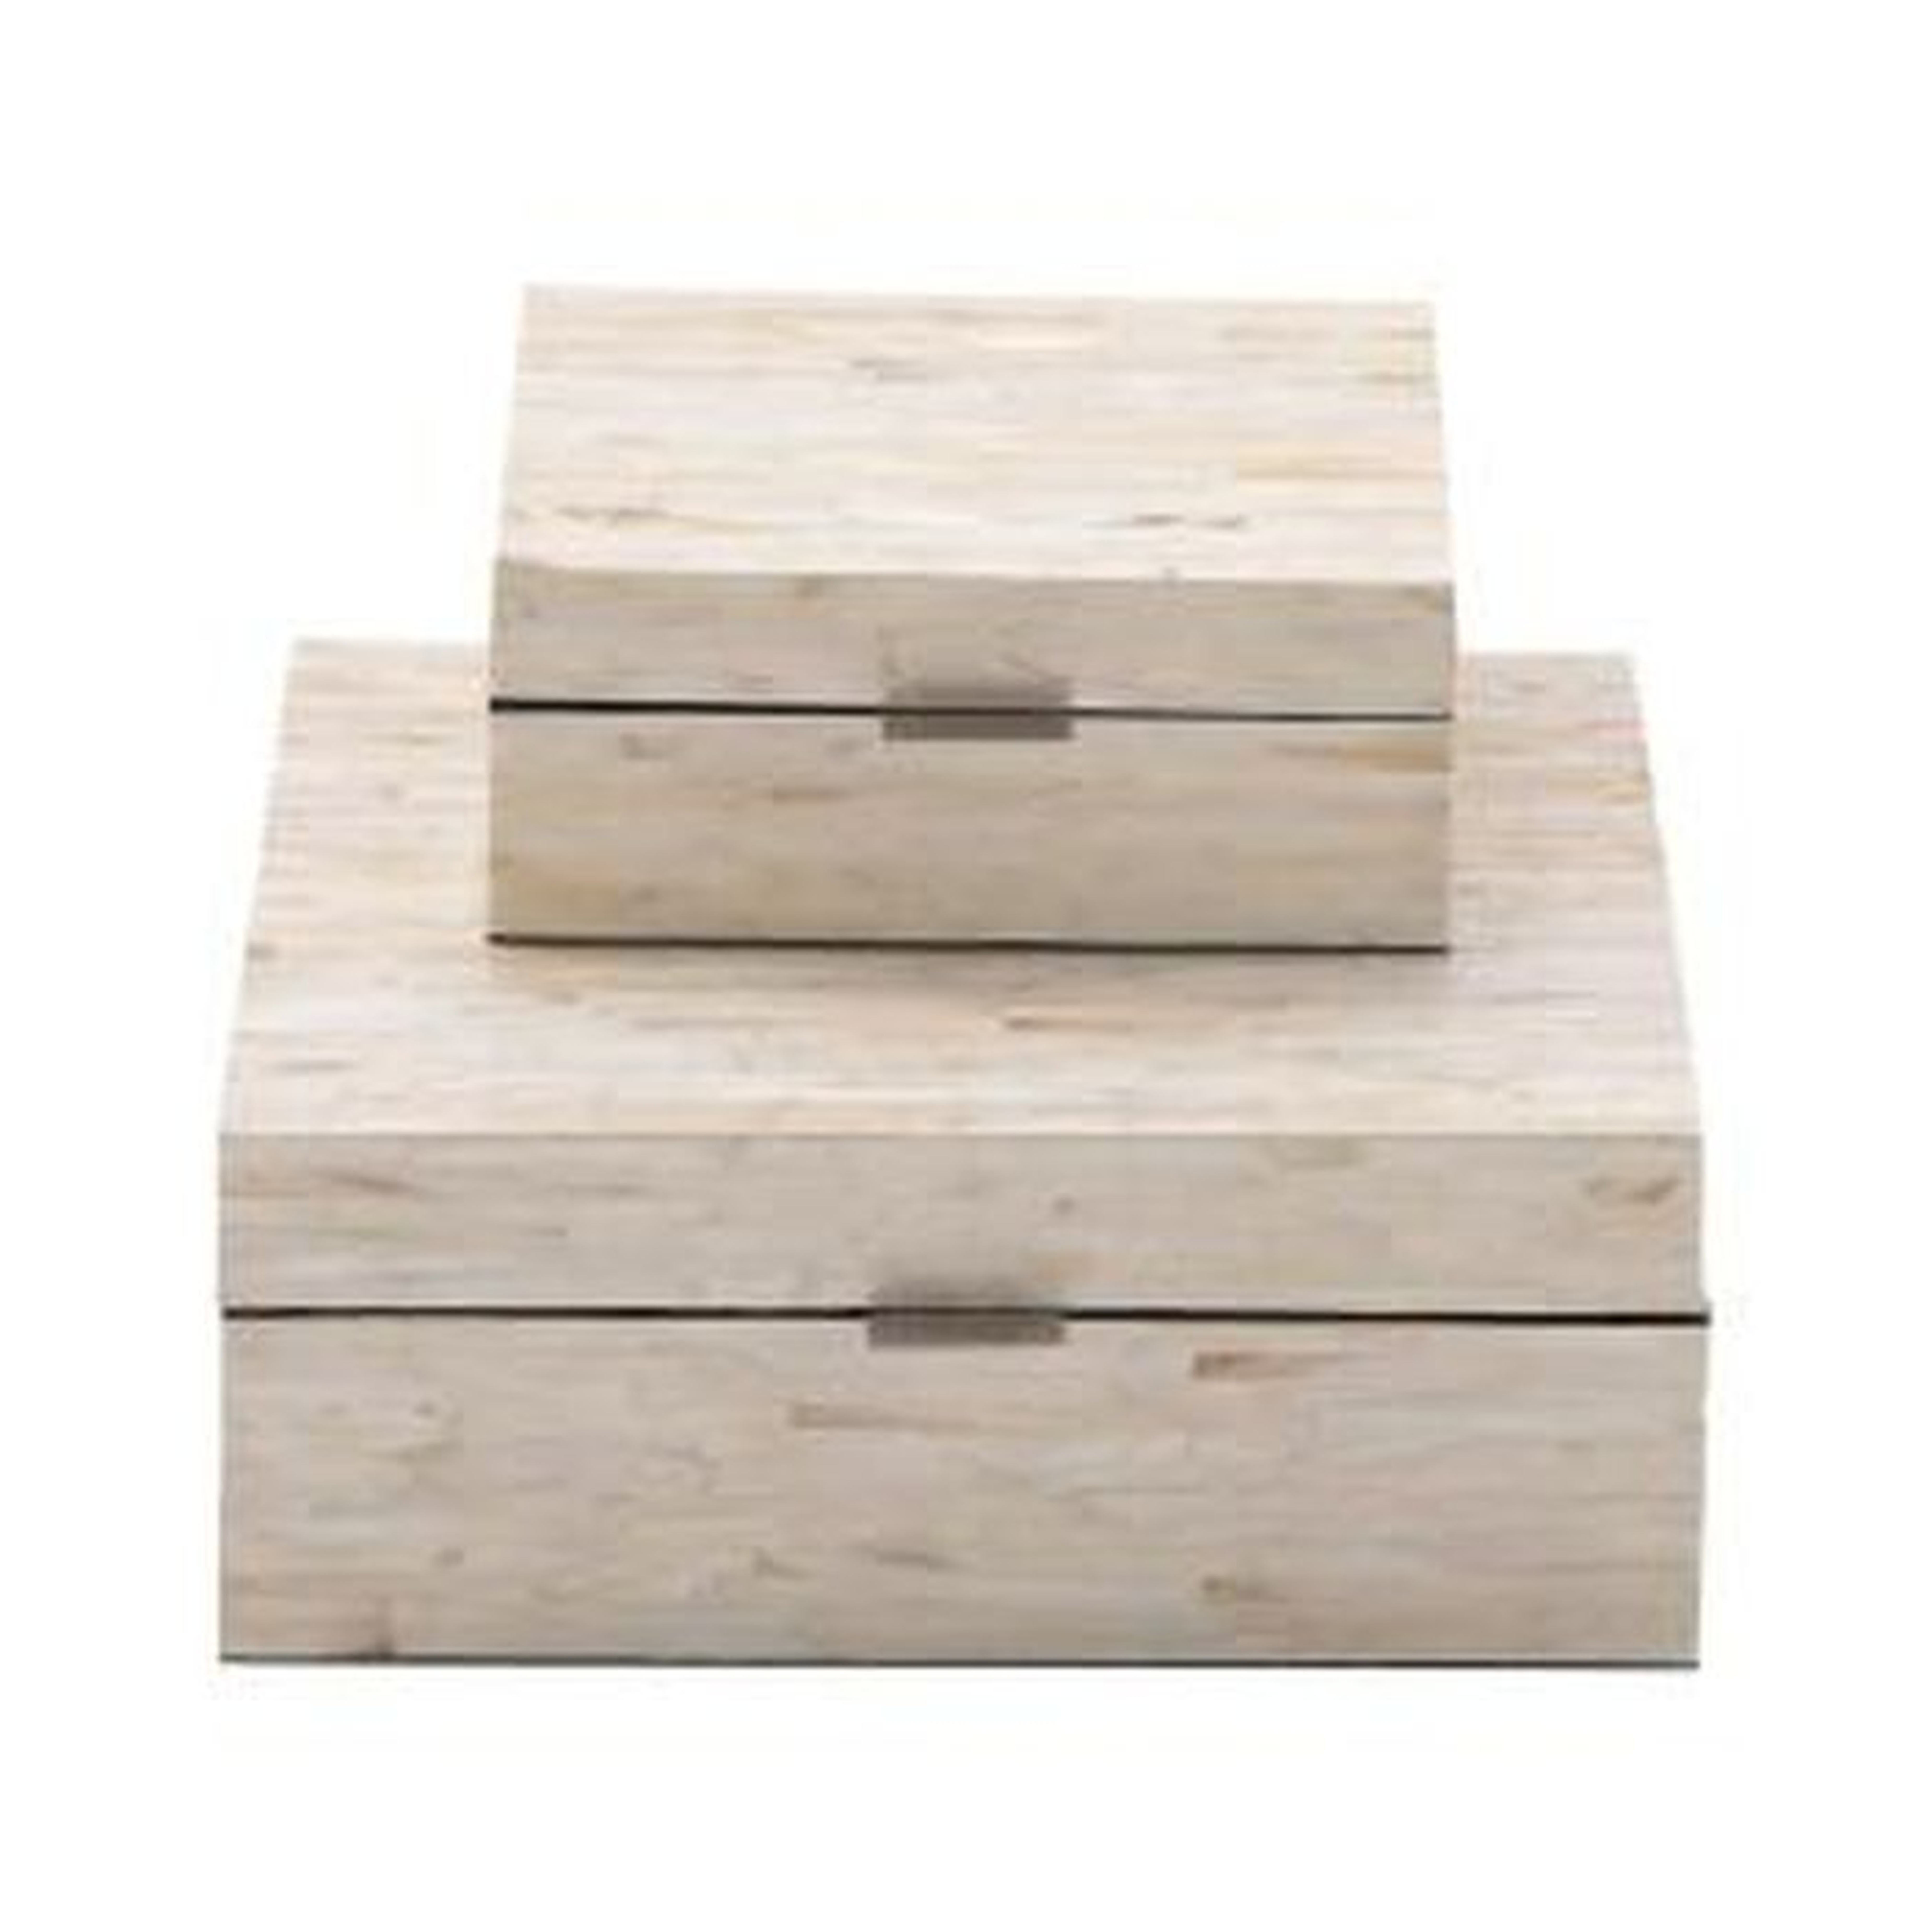 Mother of Pearl Decorative Boxes, Off-White & Tan, Set of 2 - Home Depot